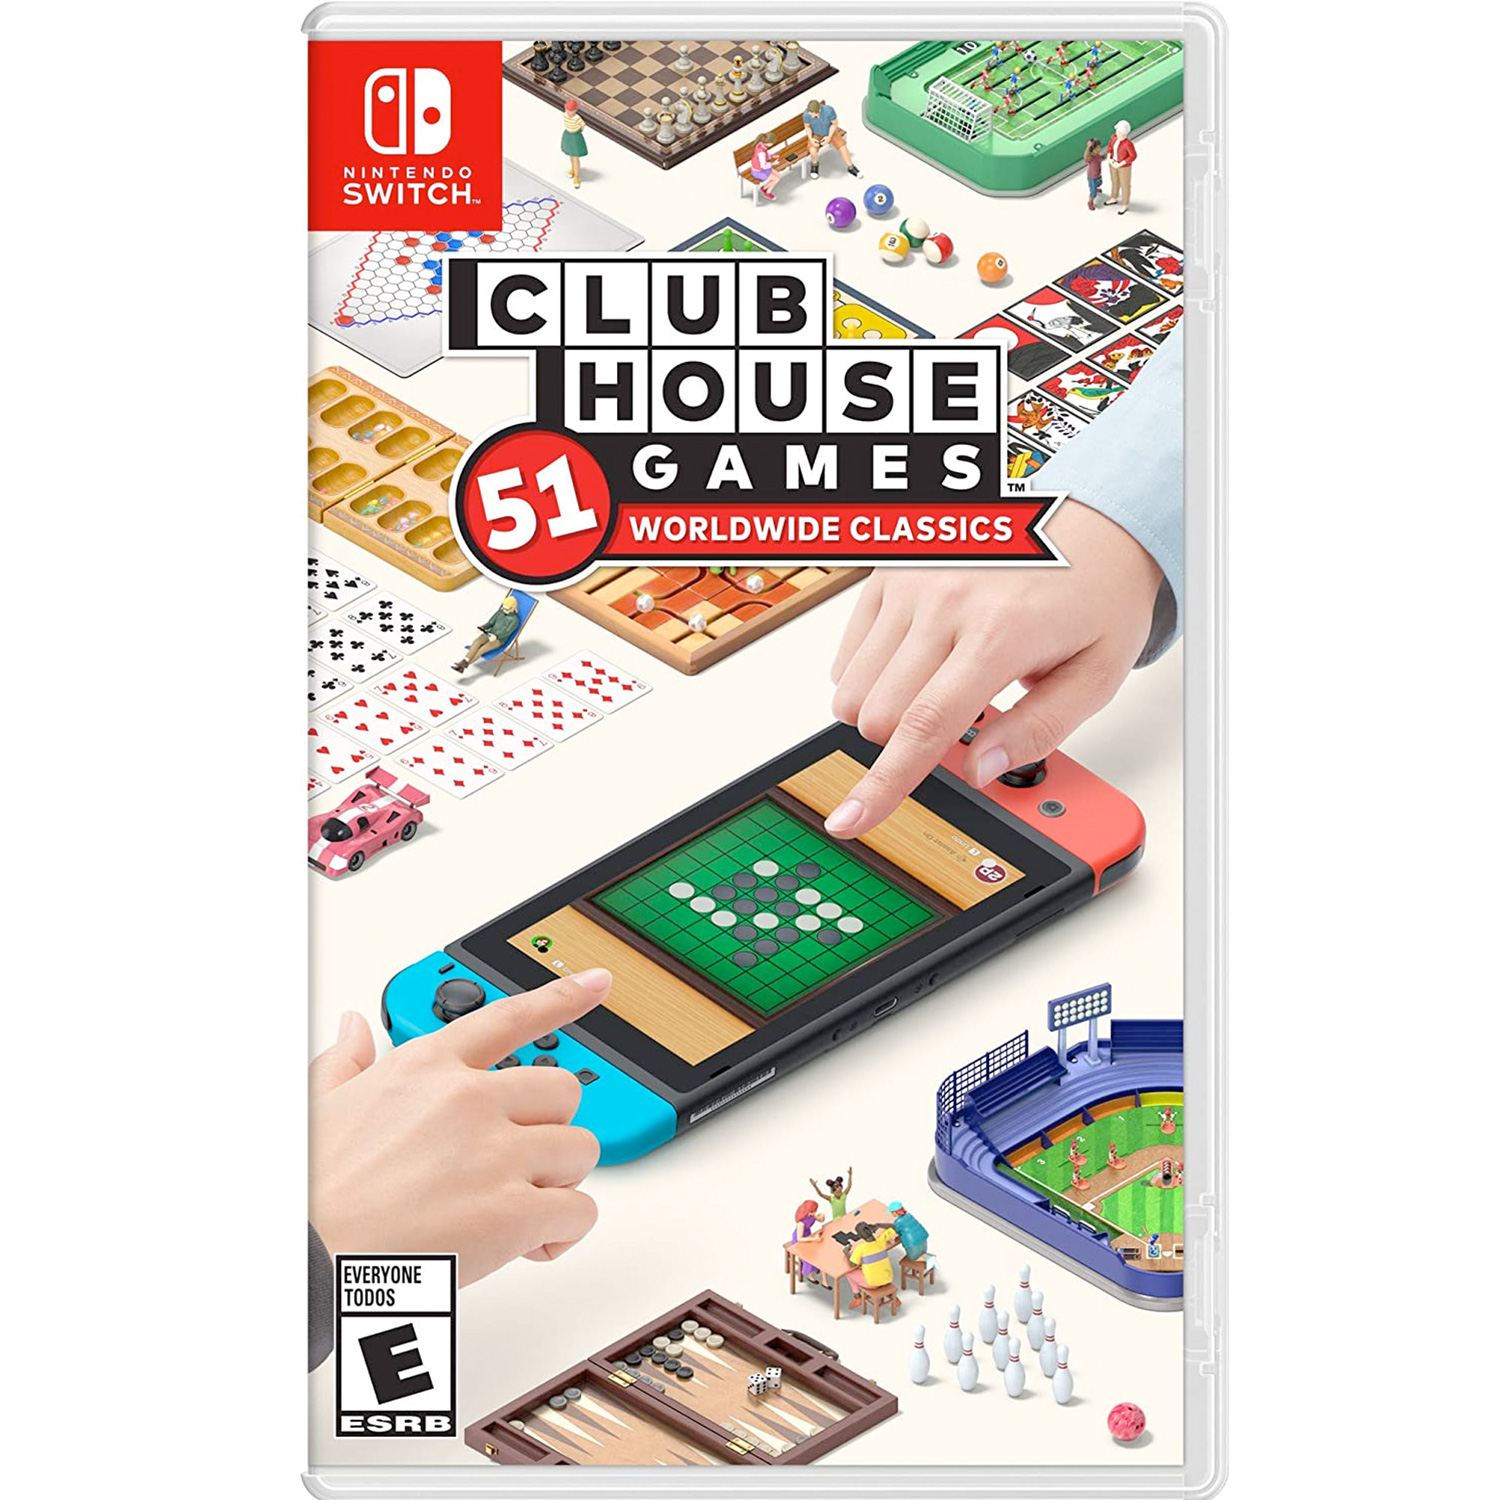 Clubhouse Games: 51 Worldwide Classics, Nintendo Switch, [Physical], 045496596781 - image 1 of 10